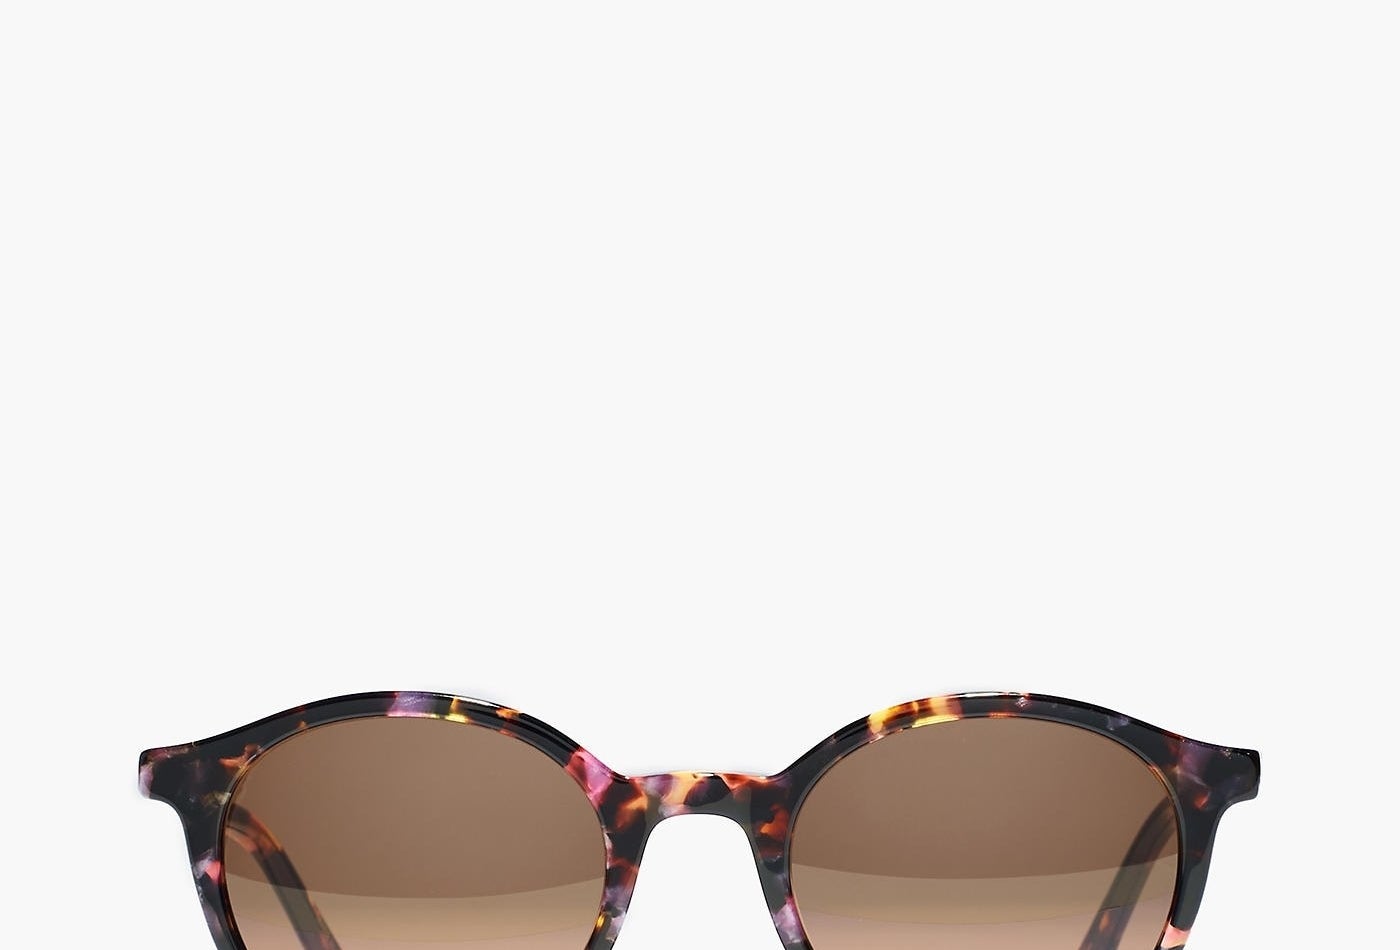 The rounded sunglasses with pink, purple, and brown tortoise-shell and brown lenses